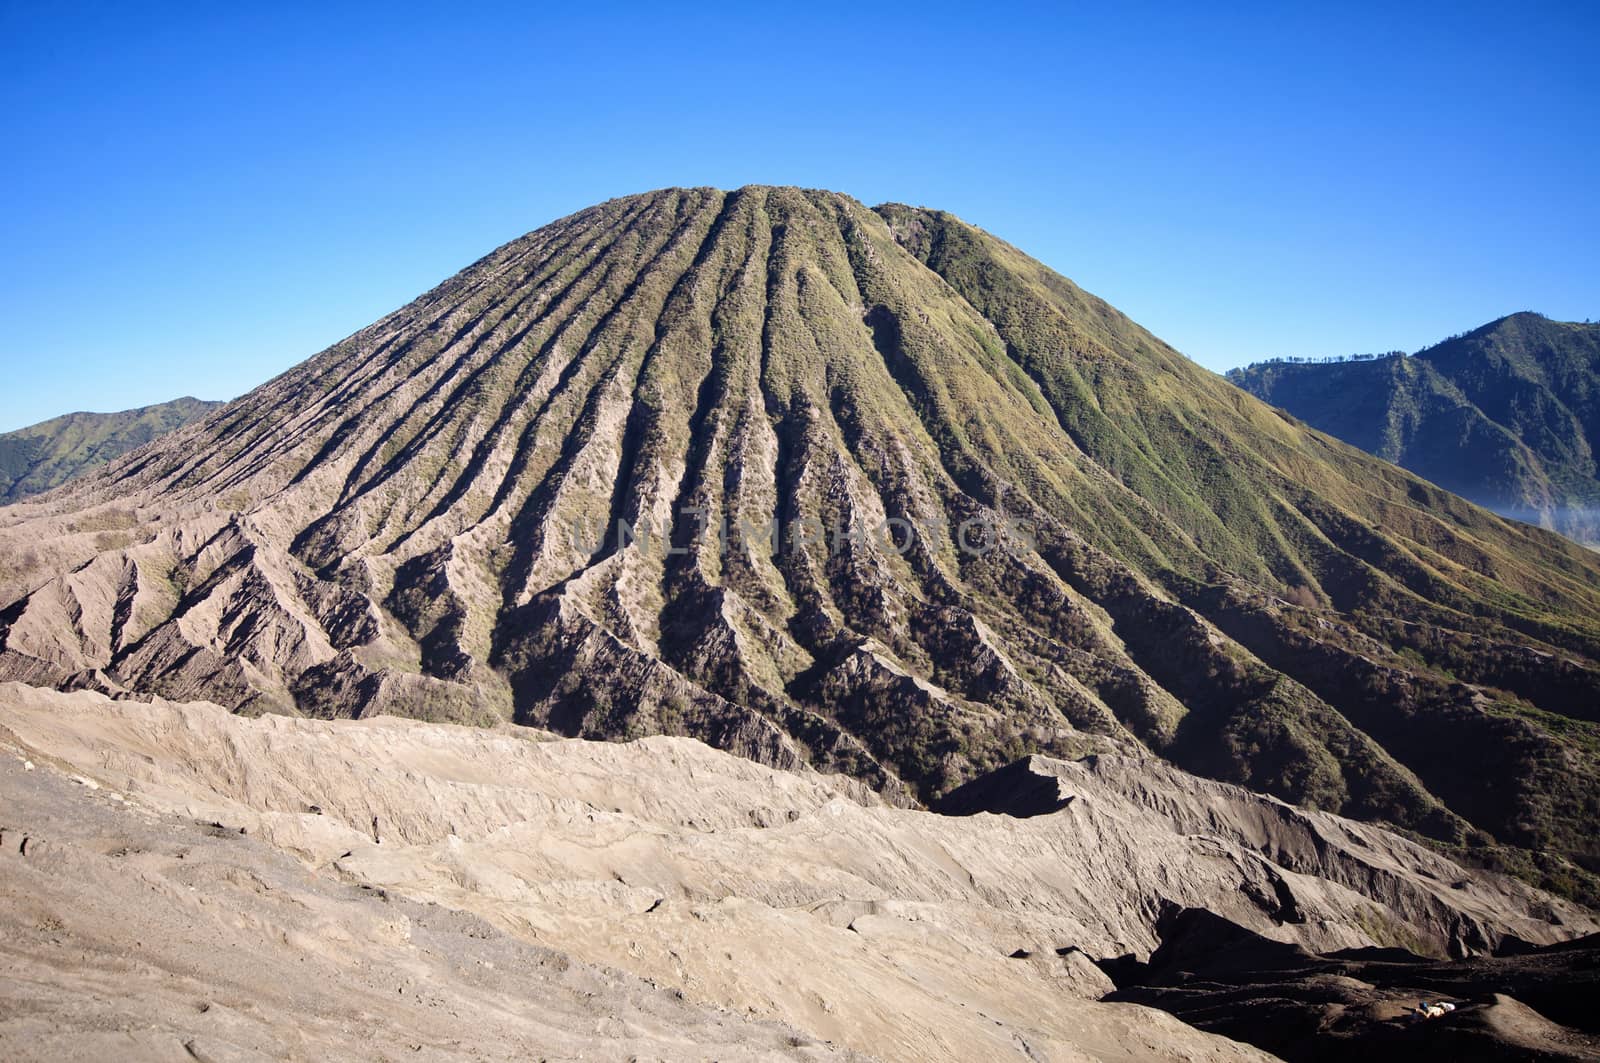 Bromo volcano in Indonesia by johnnychaos